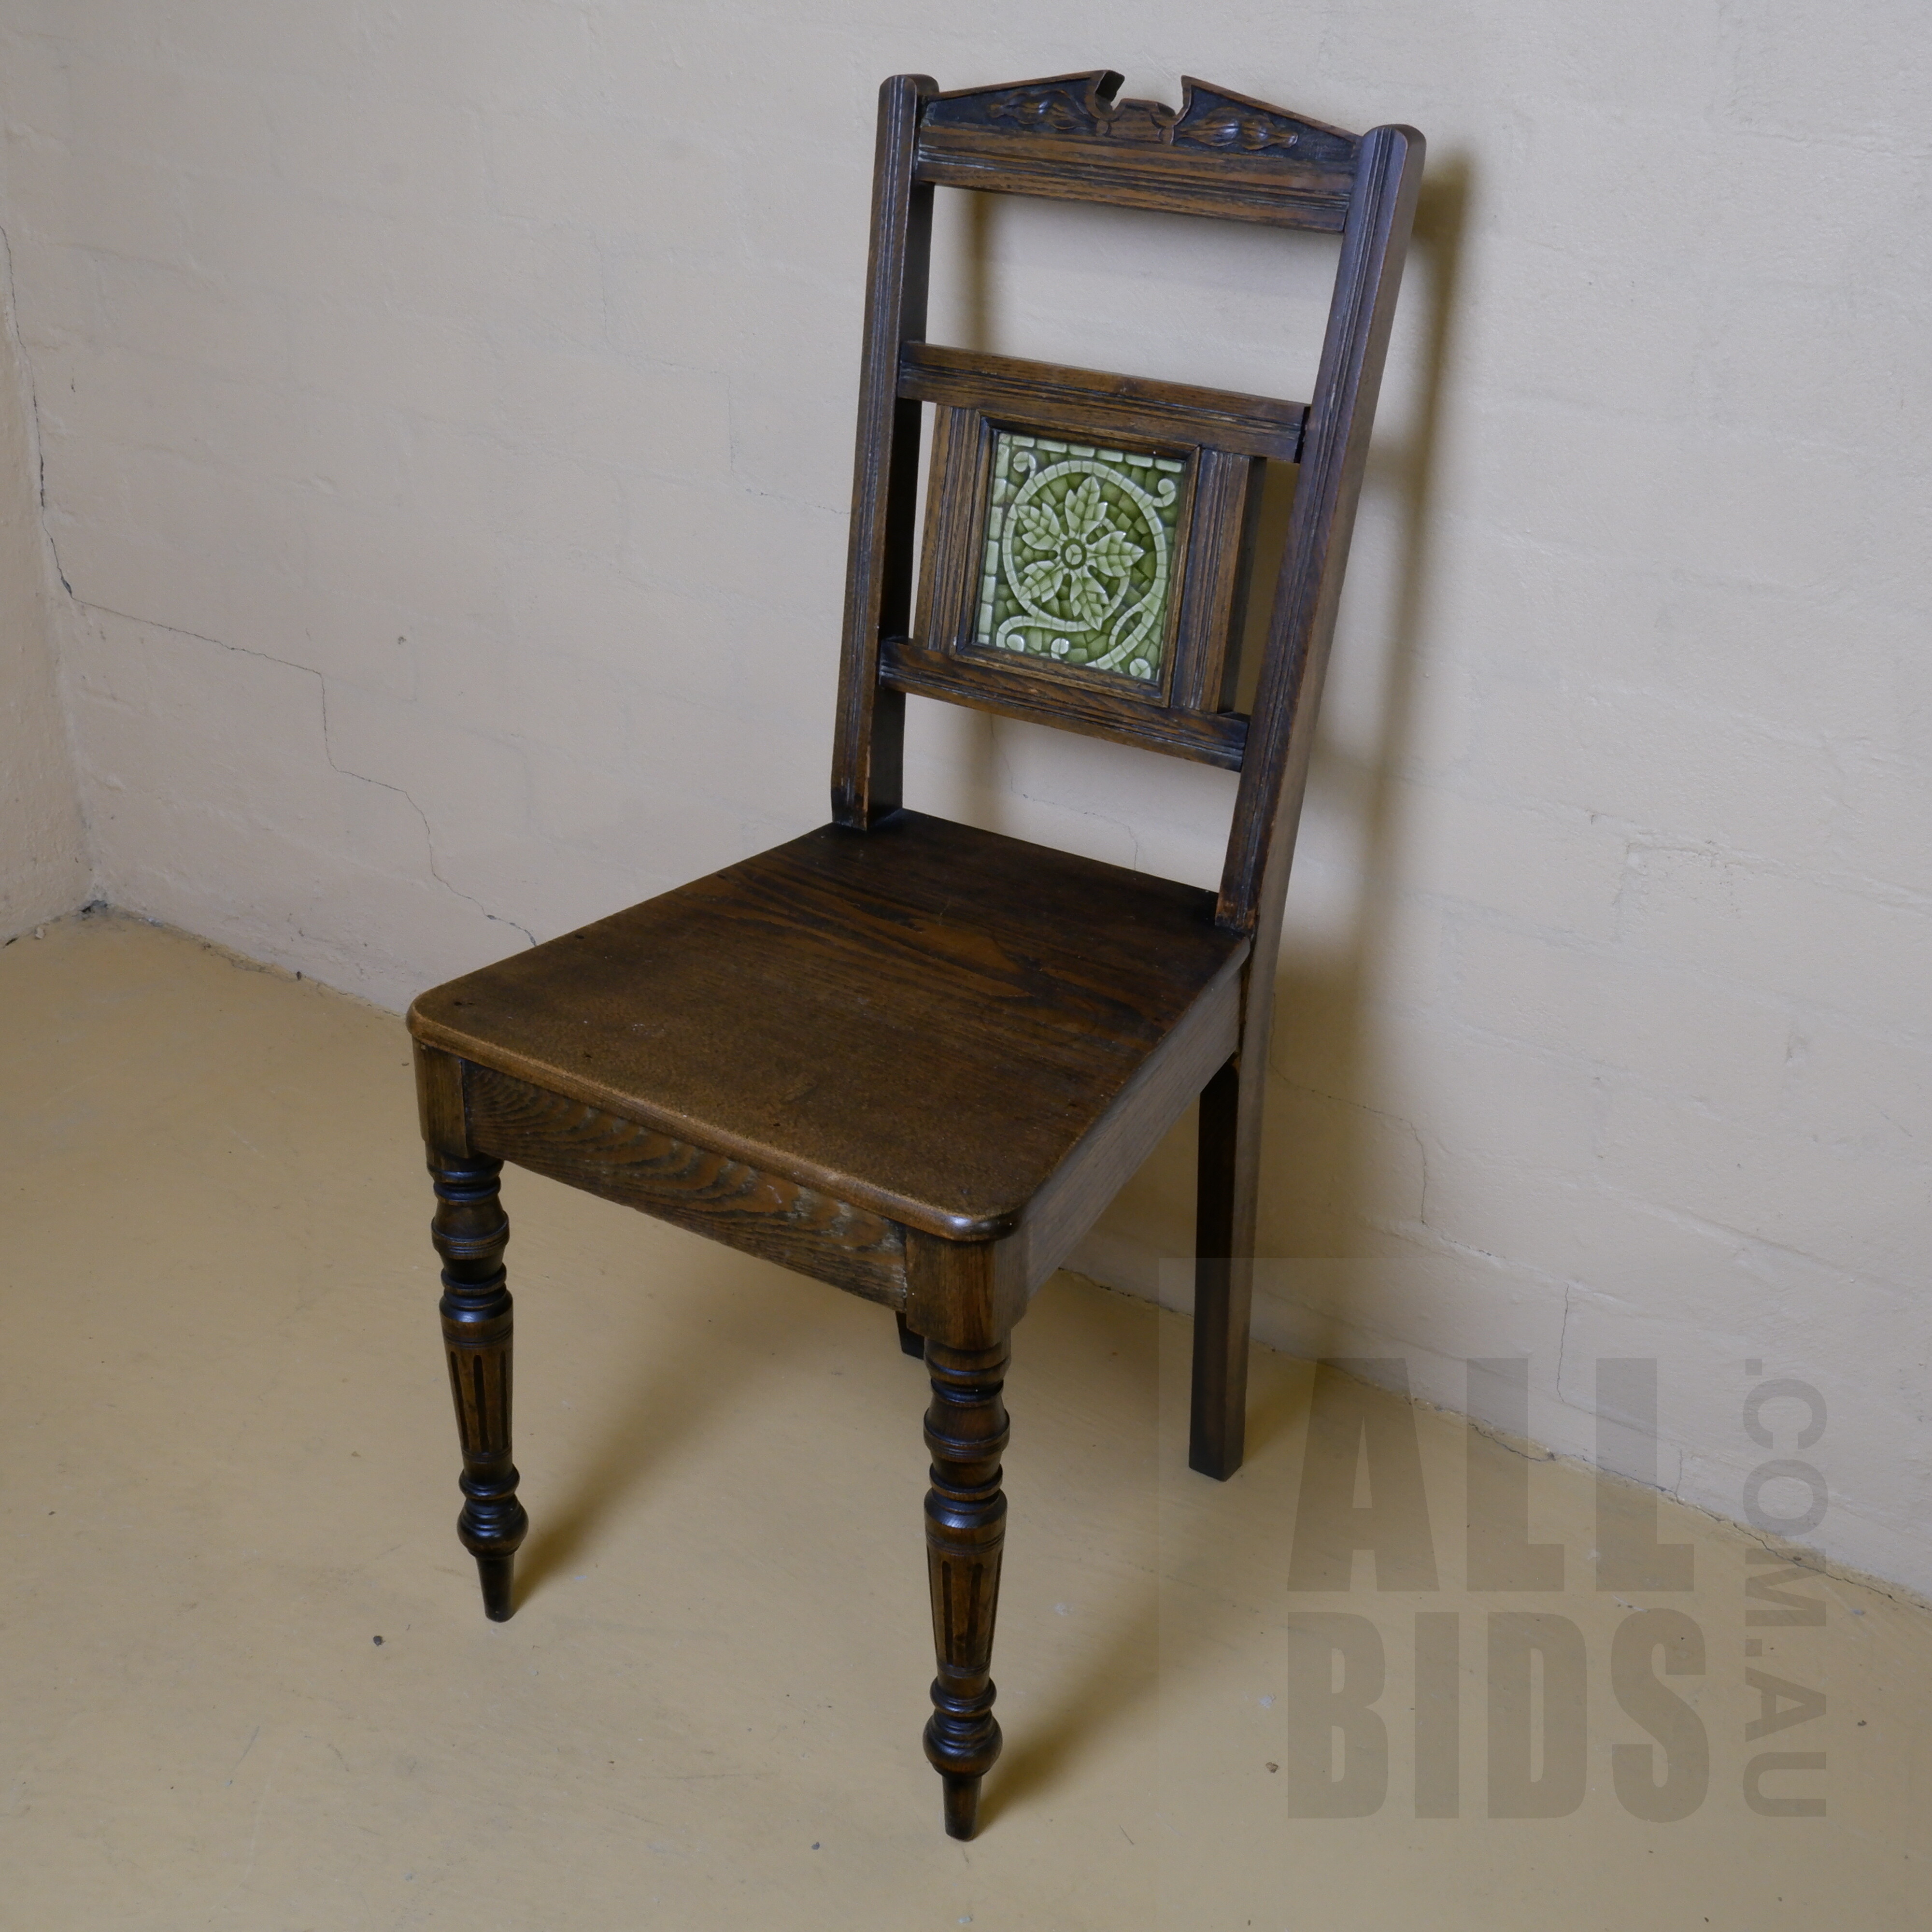 'Antique Oak Side Chair with Inlaid Majolica Glazed Tile'